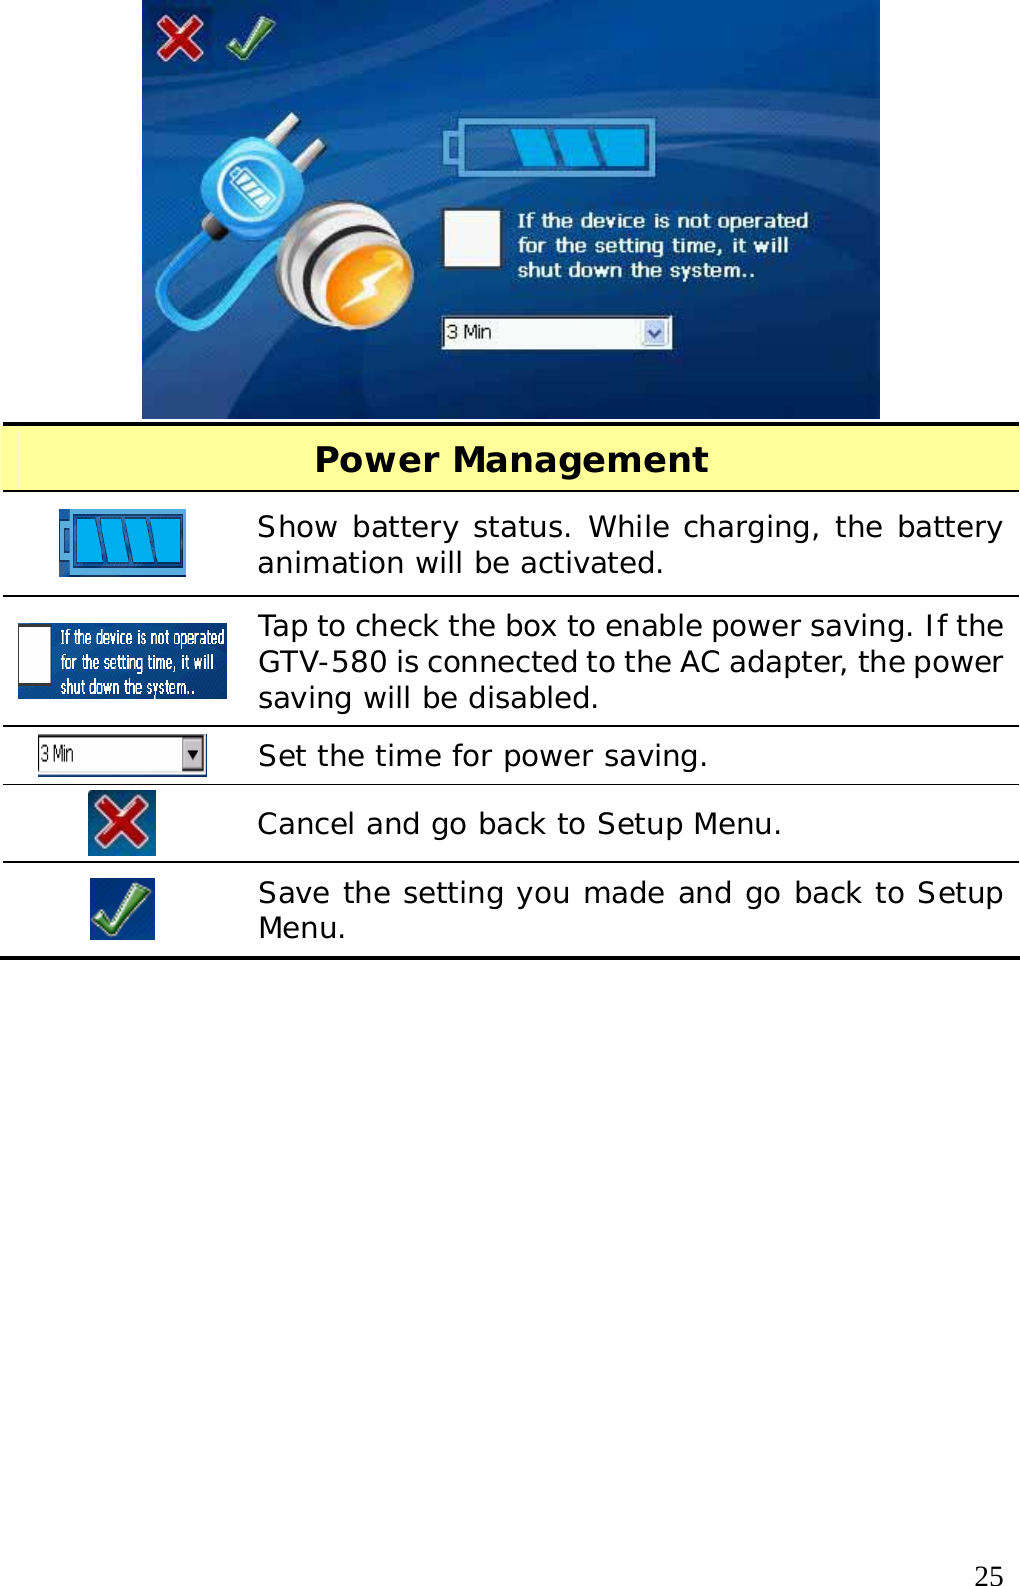  25 Power Management  Show battery status. While charging, the battery animation will be activated.  Tap to check the box to enable power saving. If the GTV-580 is connected to the AC adapter, the power saving will be disabled.  Set the time for power saving.   Cancel and go back to Setup Menu.  Save the setting you made and go back to Setup Menu.   